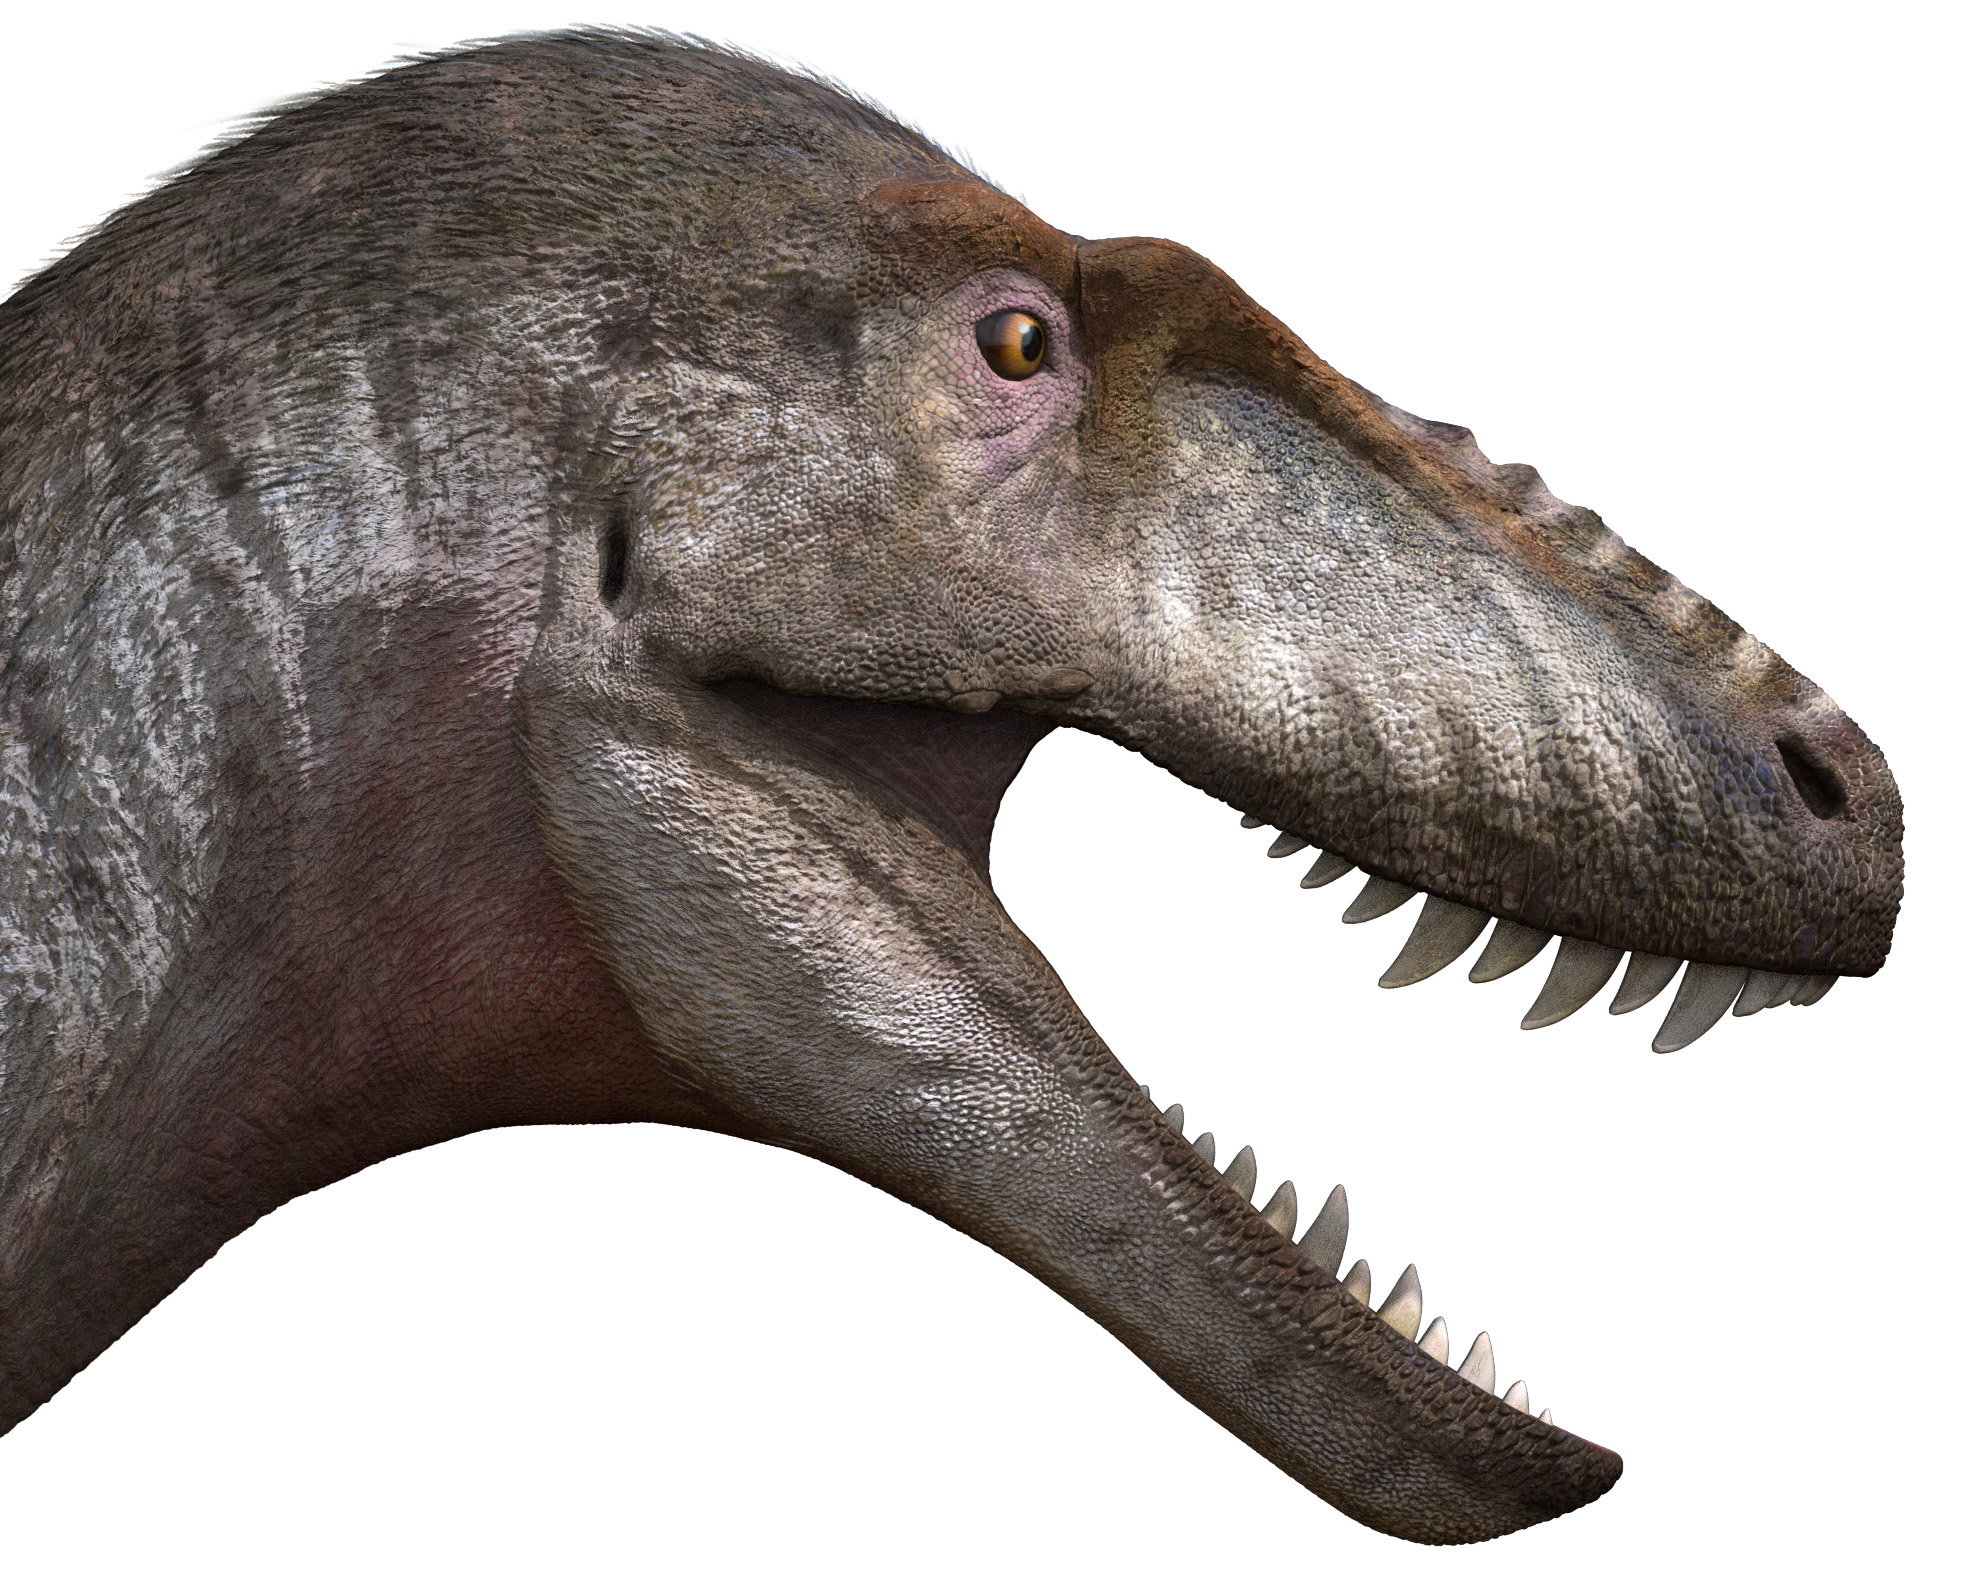 Reconstruction picture of the dinosaur's head. /Courtesy of Zheng Wenjie